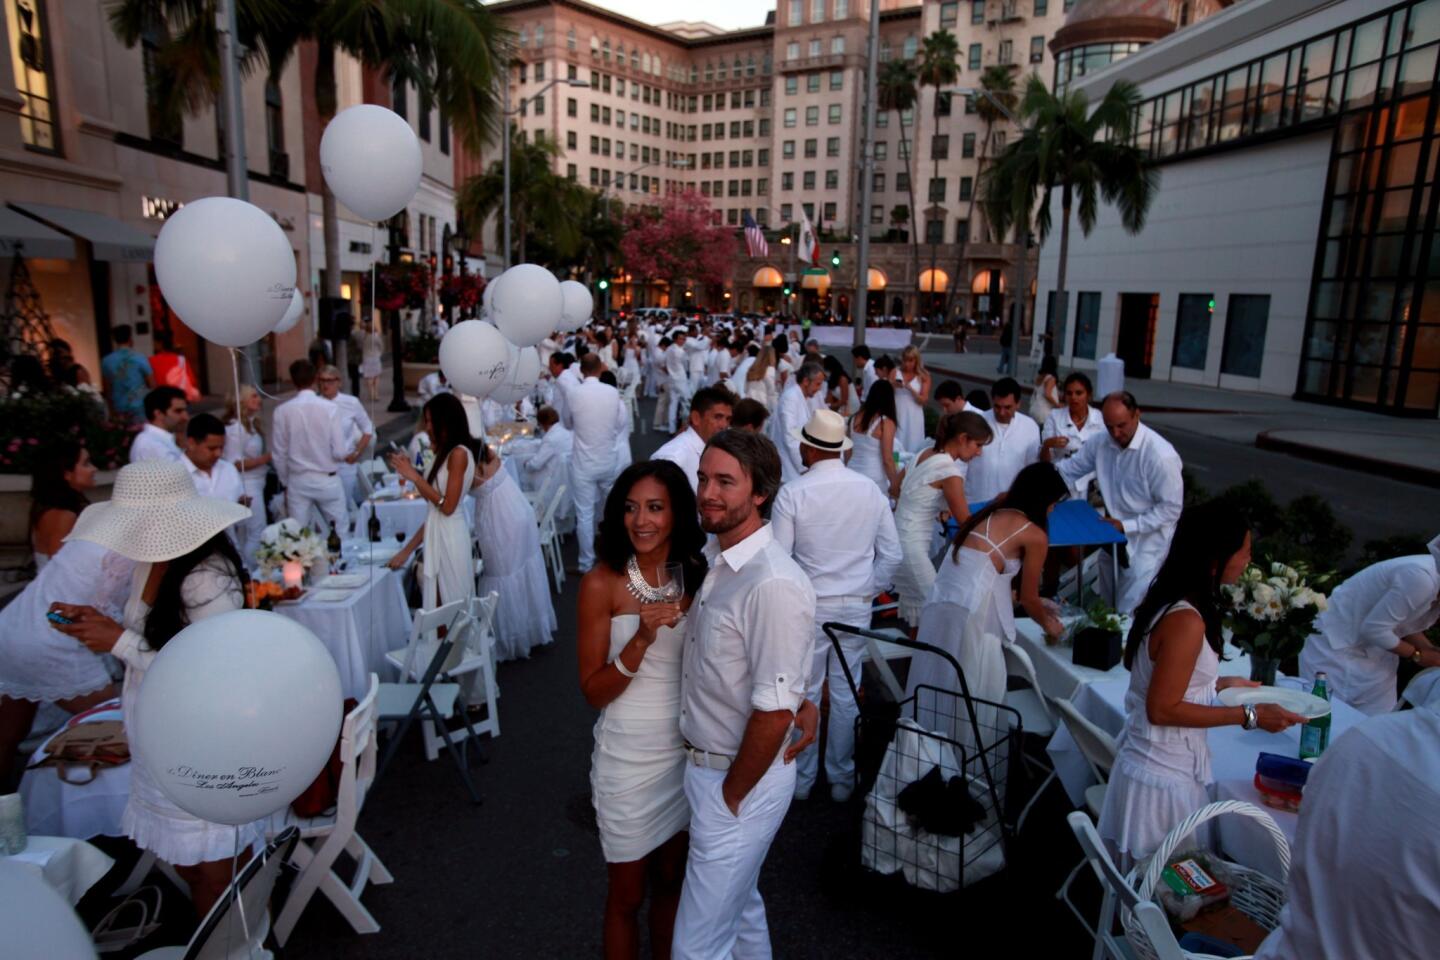 A 1,000-person dinner party took place Wednesday night on Rodeo Drive in Beverly Hills. Attendees brought their own food, chairs, tables and linens and dressed in white for the feast. The event was started by a French couple, and this is the first time it has taken place in Southern California.